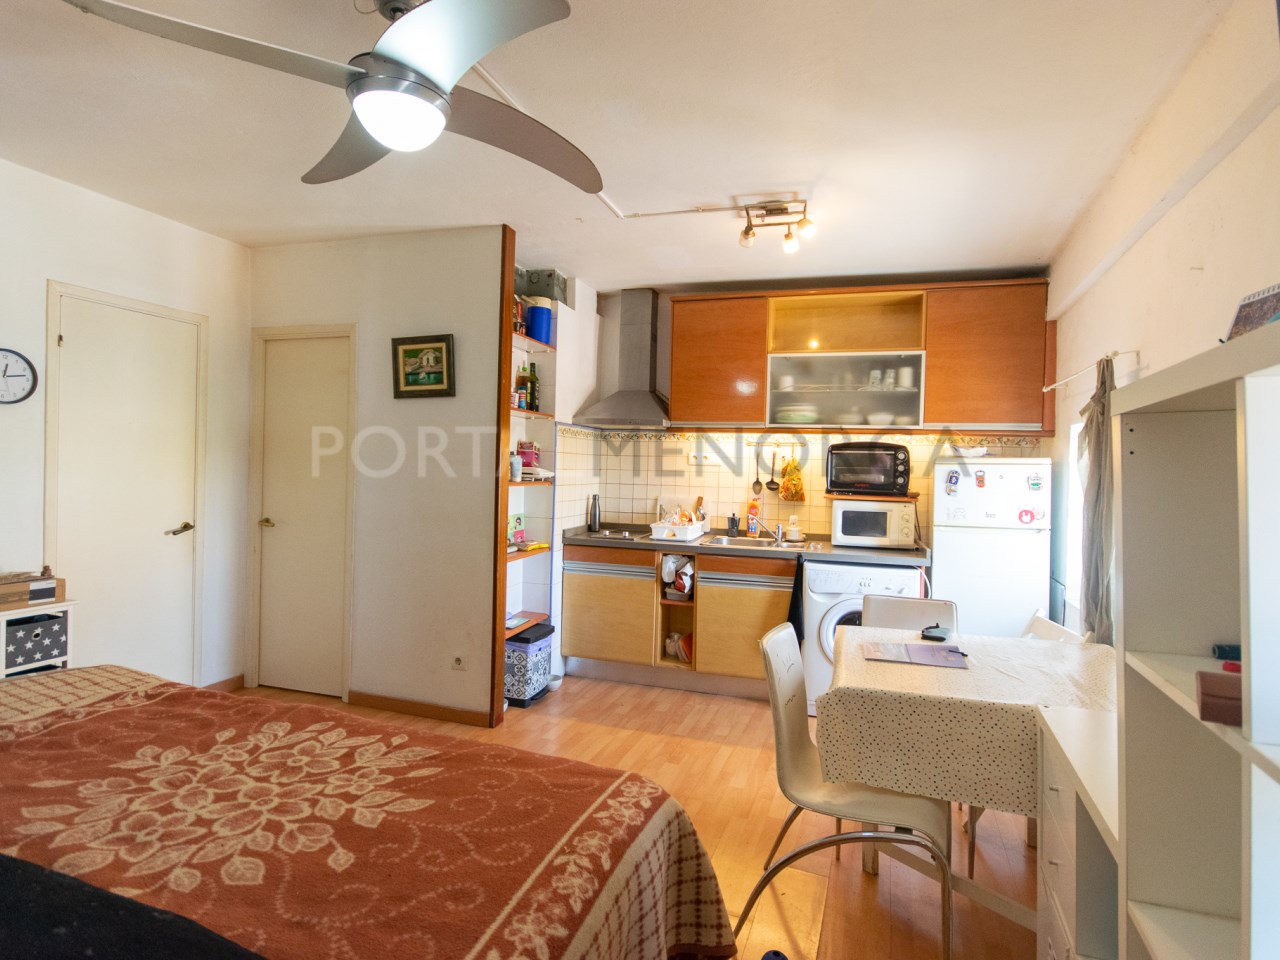 3rd floor building with 3 apartments in the center of Mahon